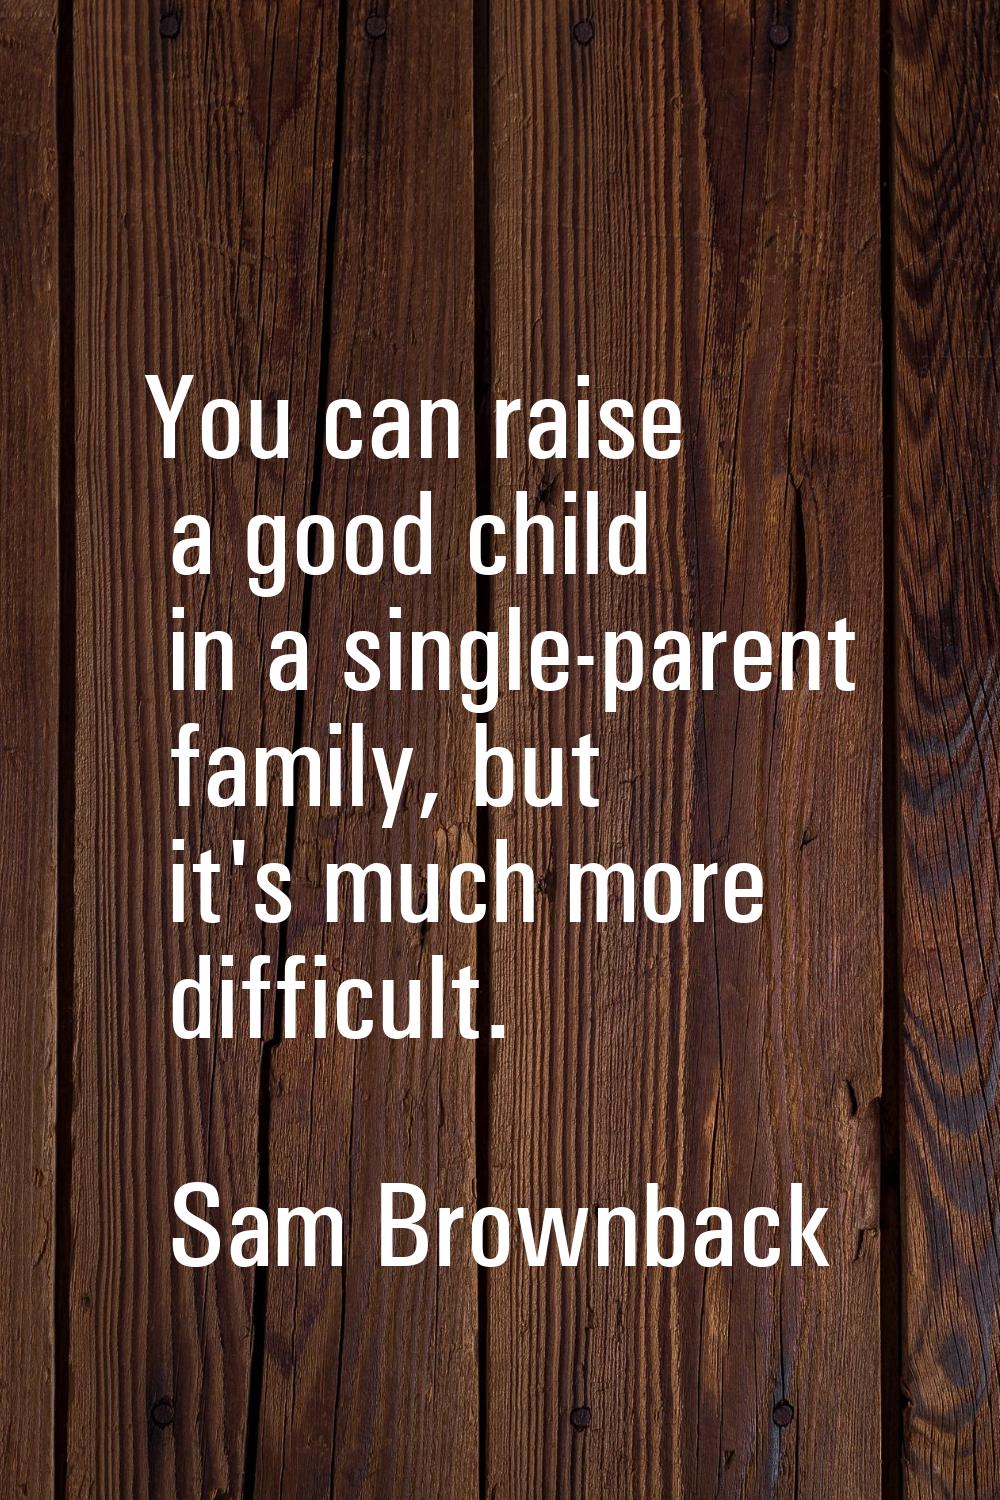 You can raise a good child in a single-parent family, but it's much more difficult.